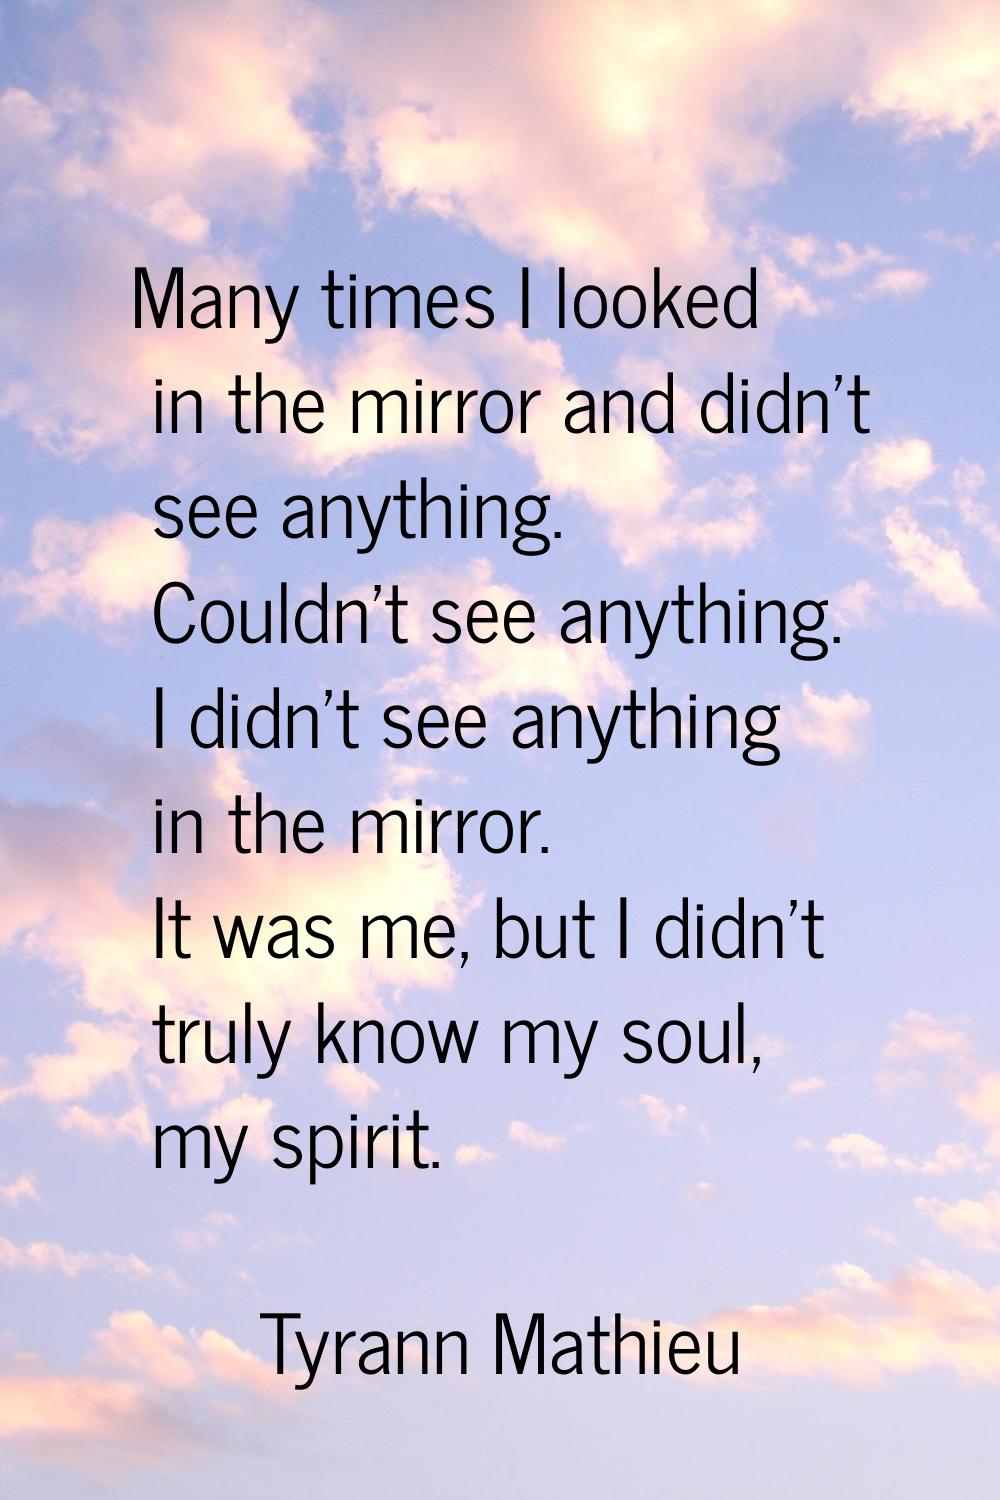 Many times I looked in the mirror and didn't see anything. Couldn't see anything. I didn't see anyt